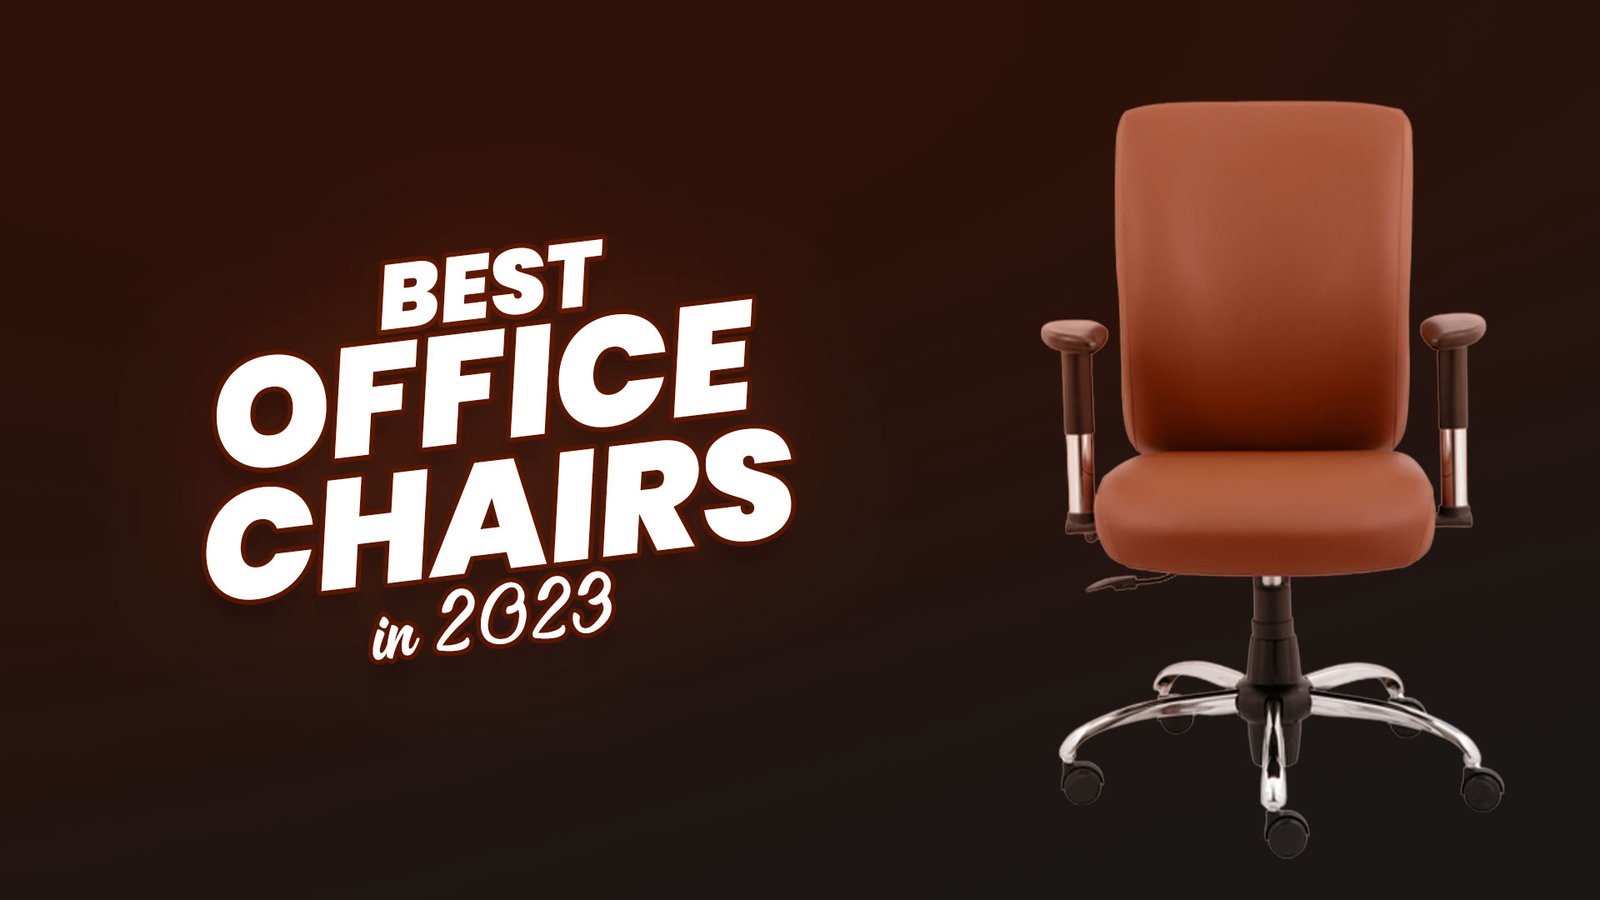 15+ Best Office Chairs 2024 According To Experts